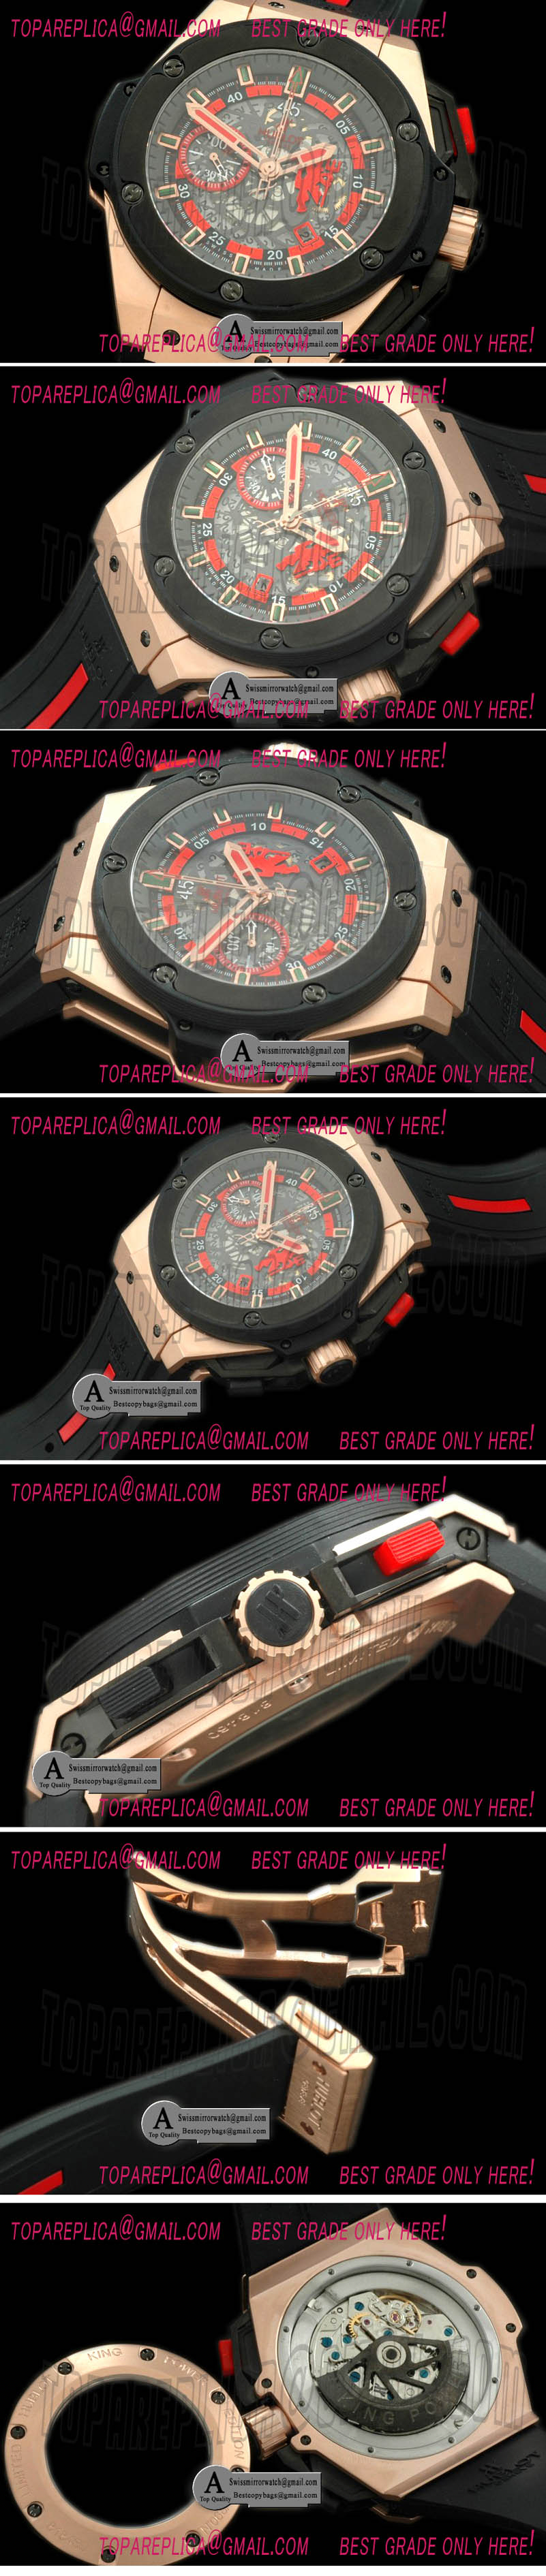 Hublot 716.OM.1129.RX.MAN11 King Power Red Devil Rose Gold/PVD/Rubber Skeleton Asian 7750 Replica Watches